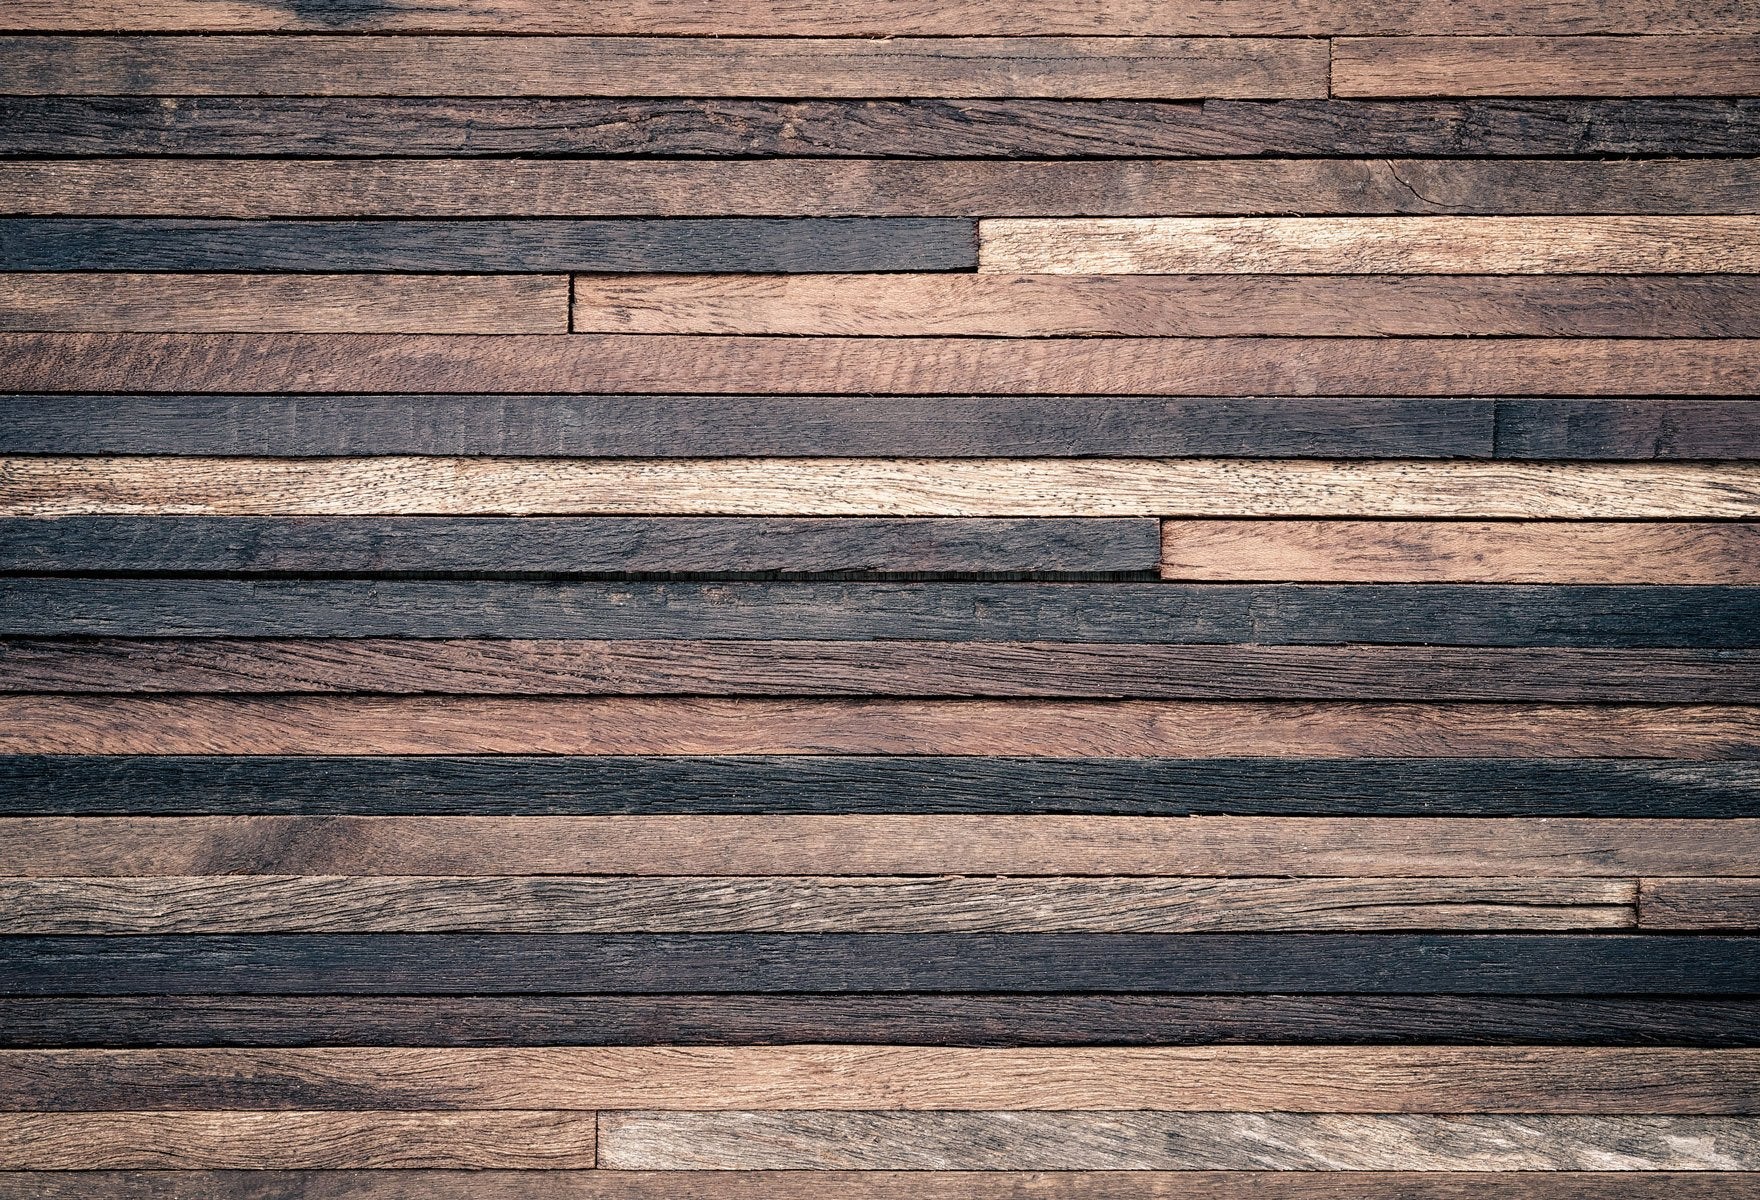 Katebackdrop：Kate Dark and Brown Wooden floor Backdrop for Photography